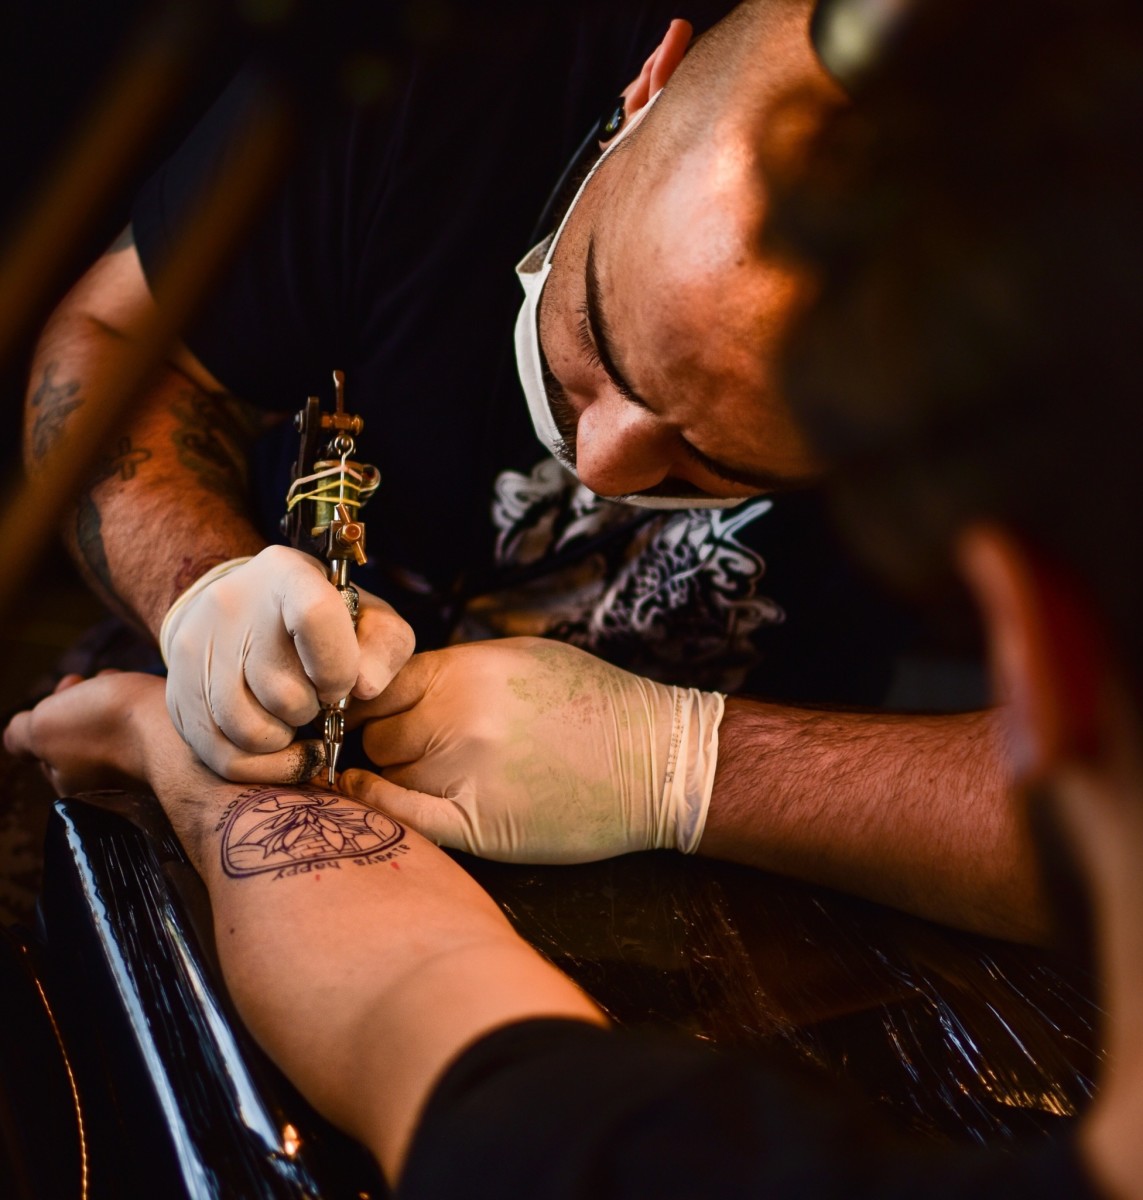 How Much Does a Tattoo Cost? - TatRing